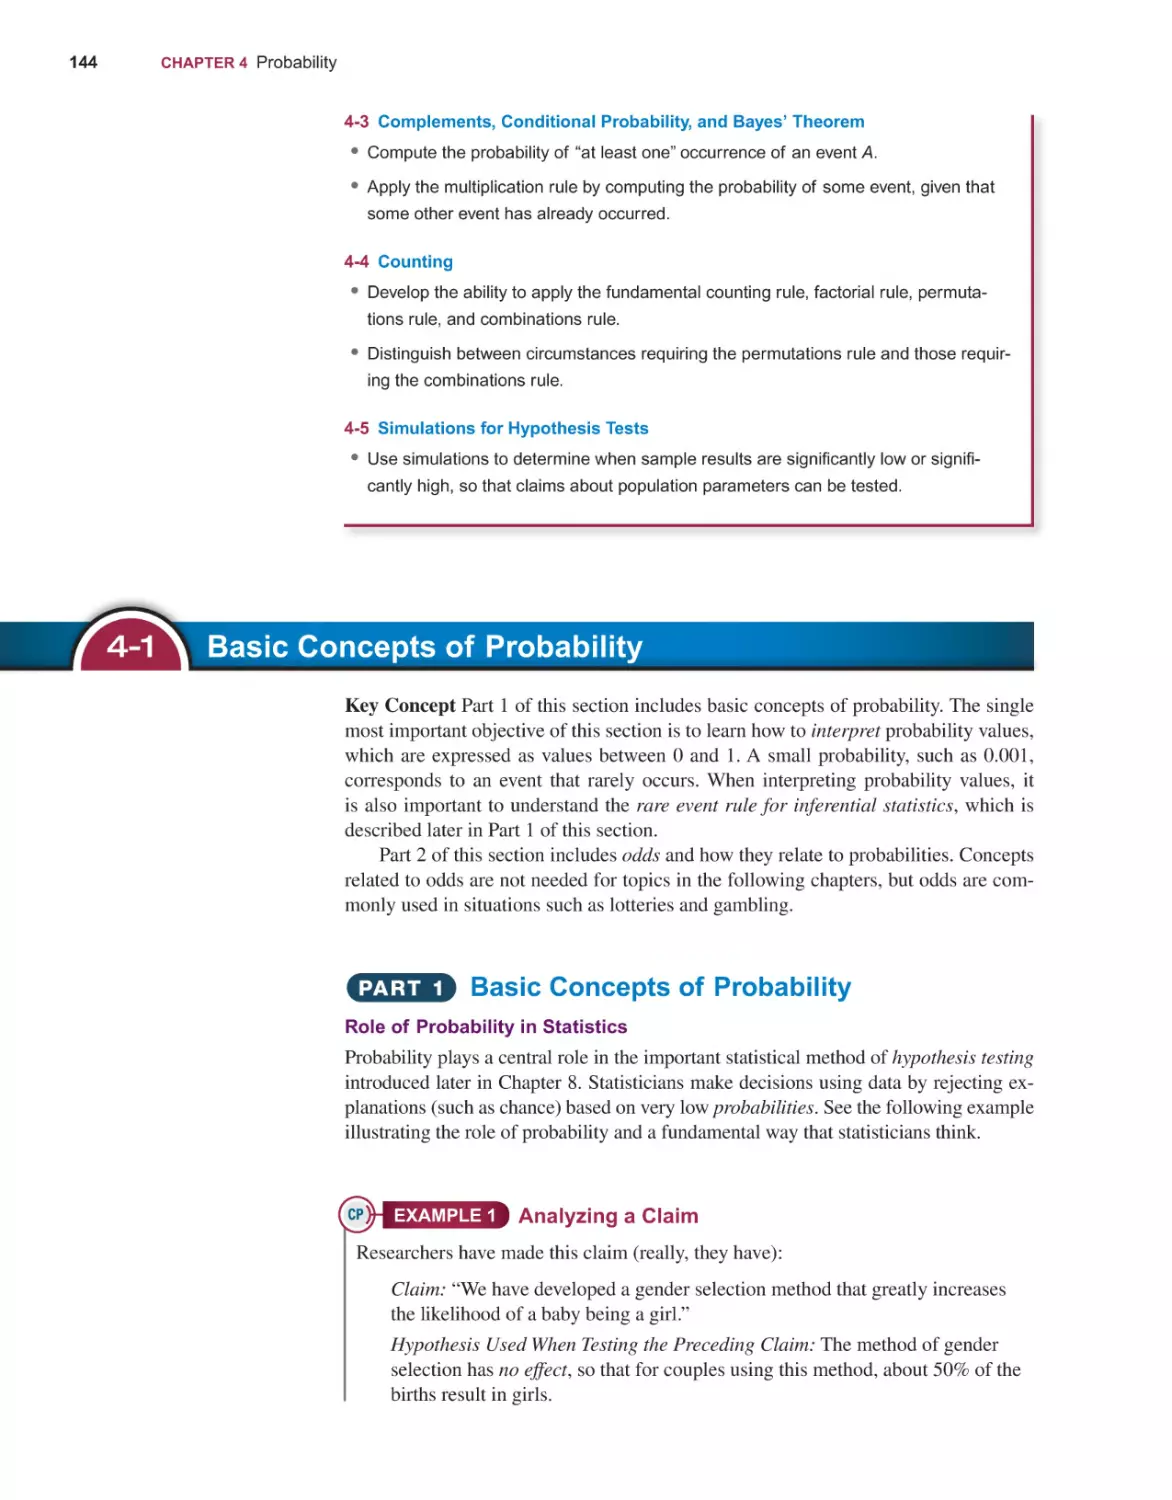 4‐1 Basic Concepts of Probability